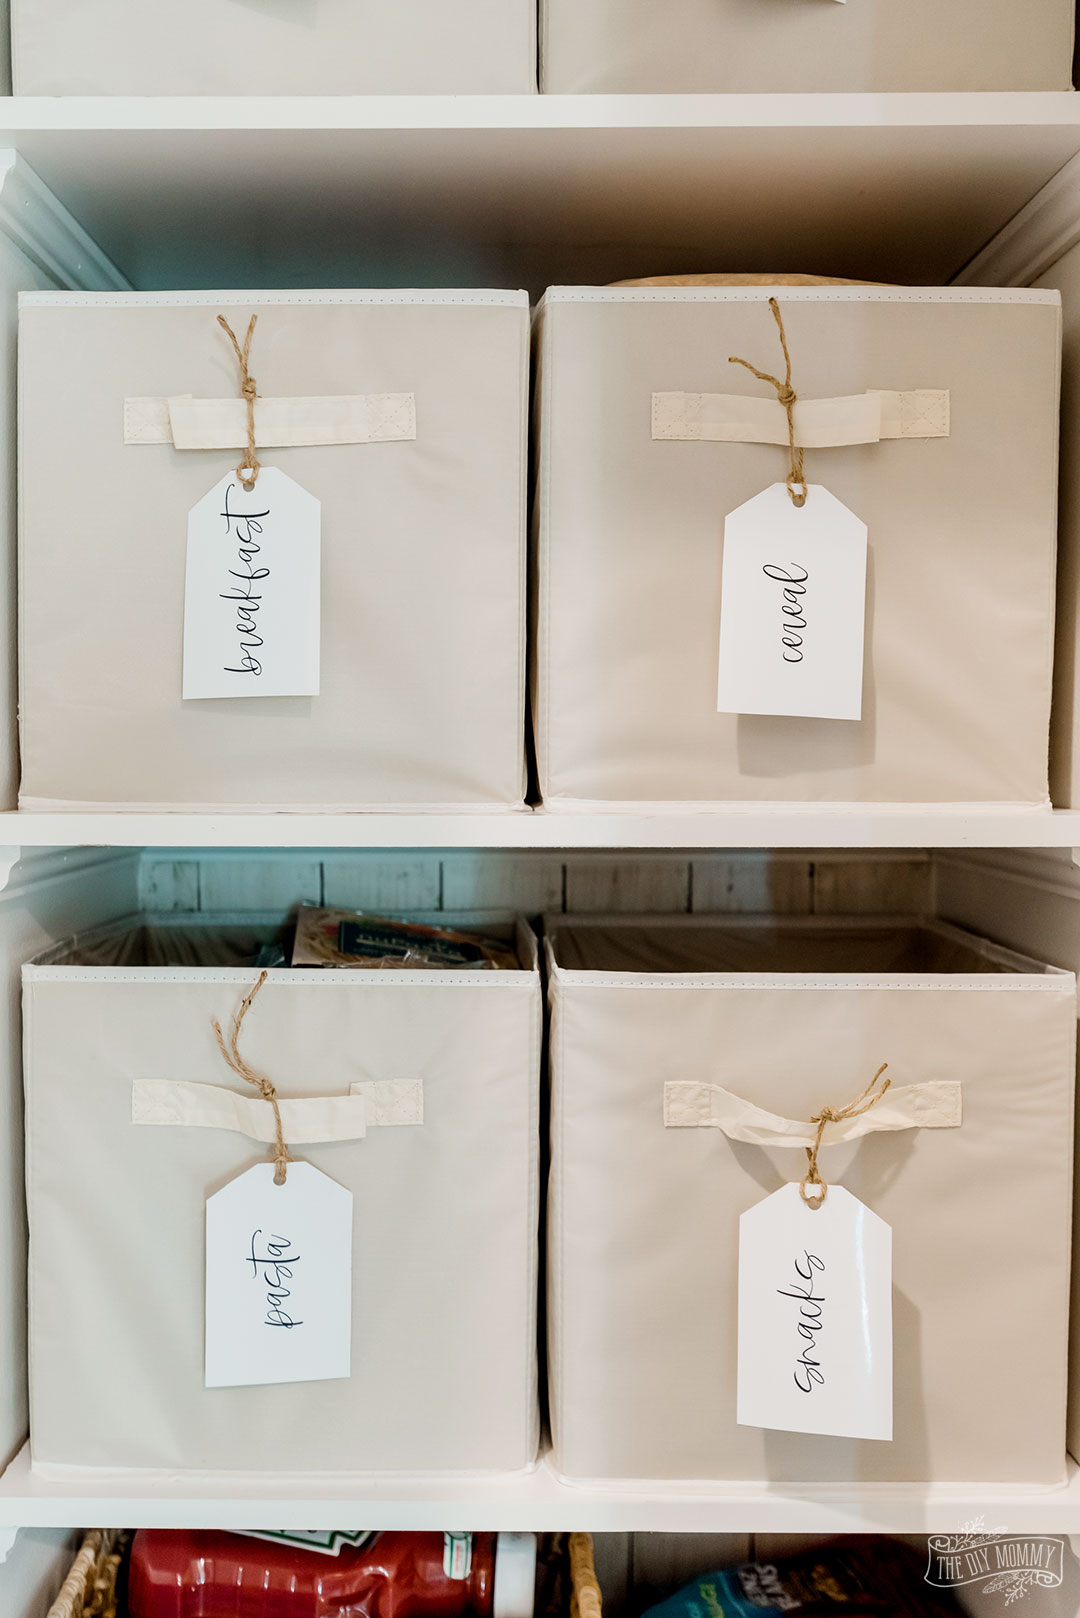 Download these free pantry organization tags in a simple modern farmhouse style.